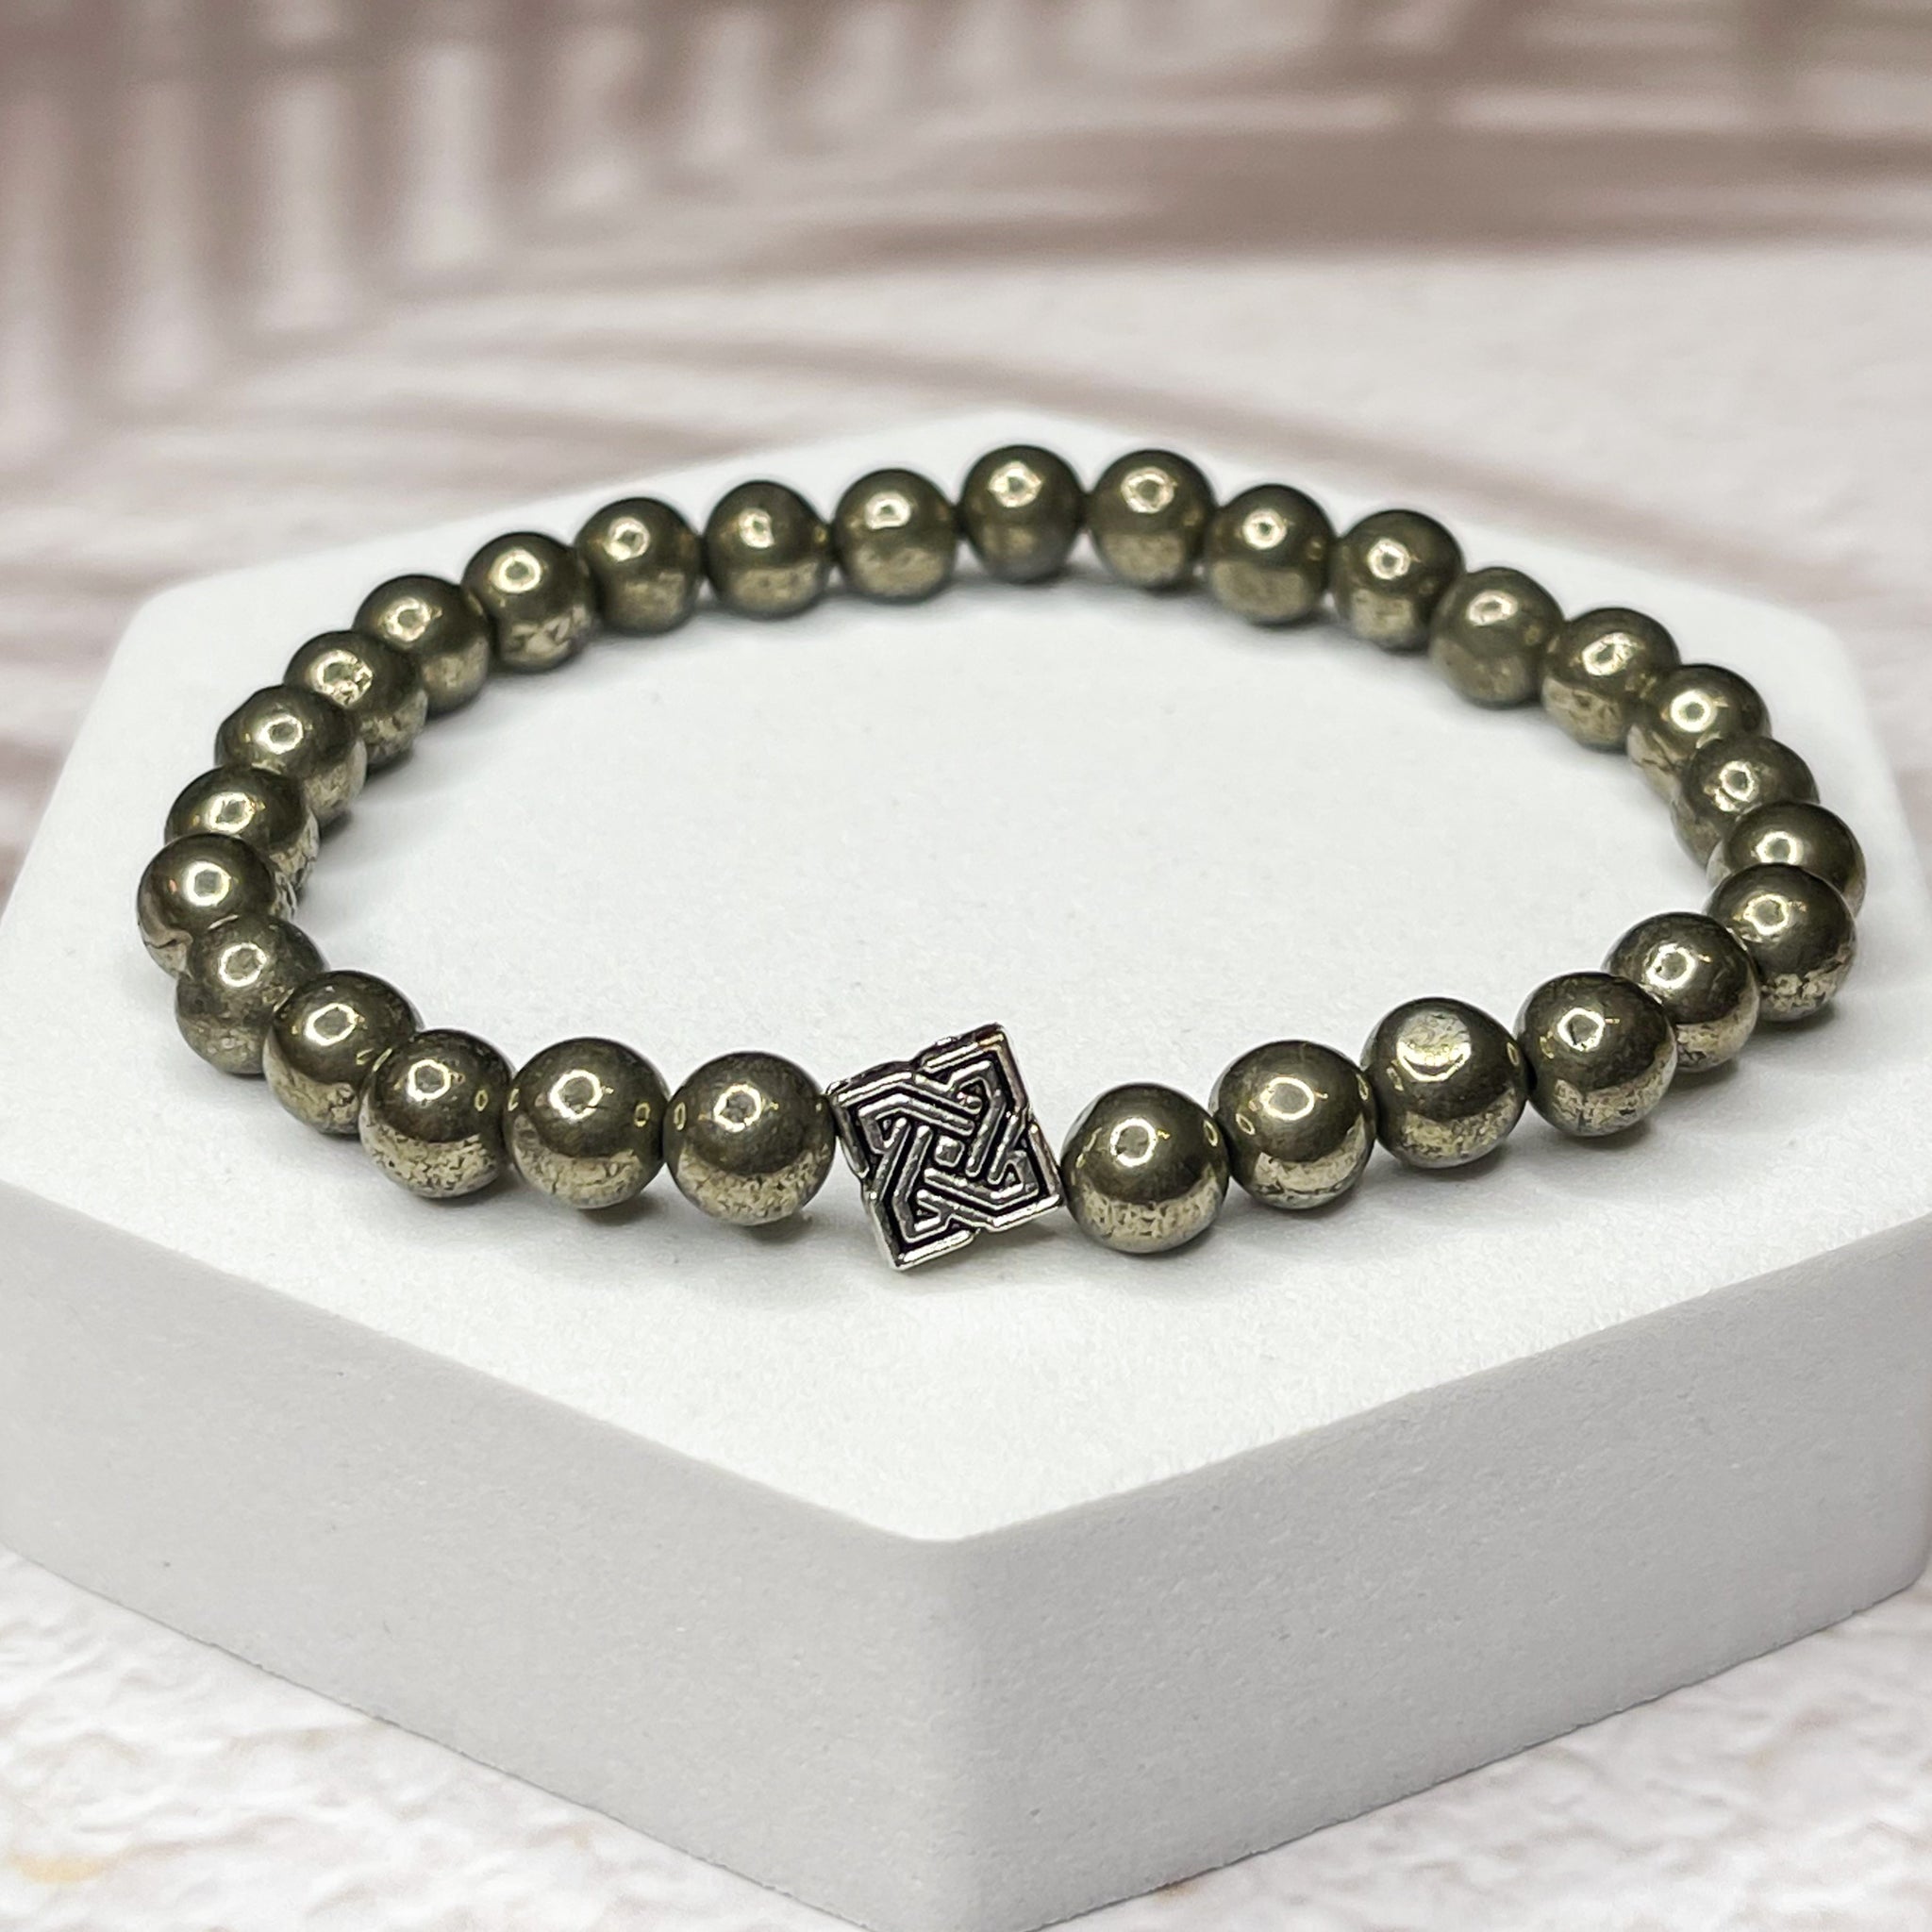 Natural Pyrite 6 mm Crystal Stone Bracelets for Healing